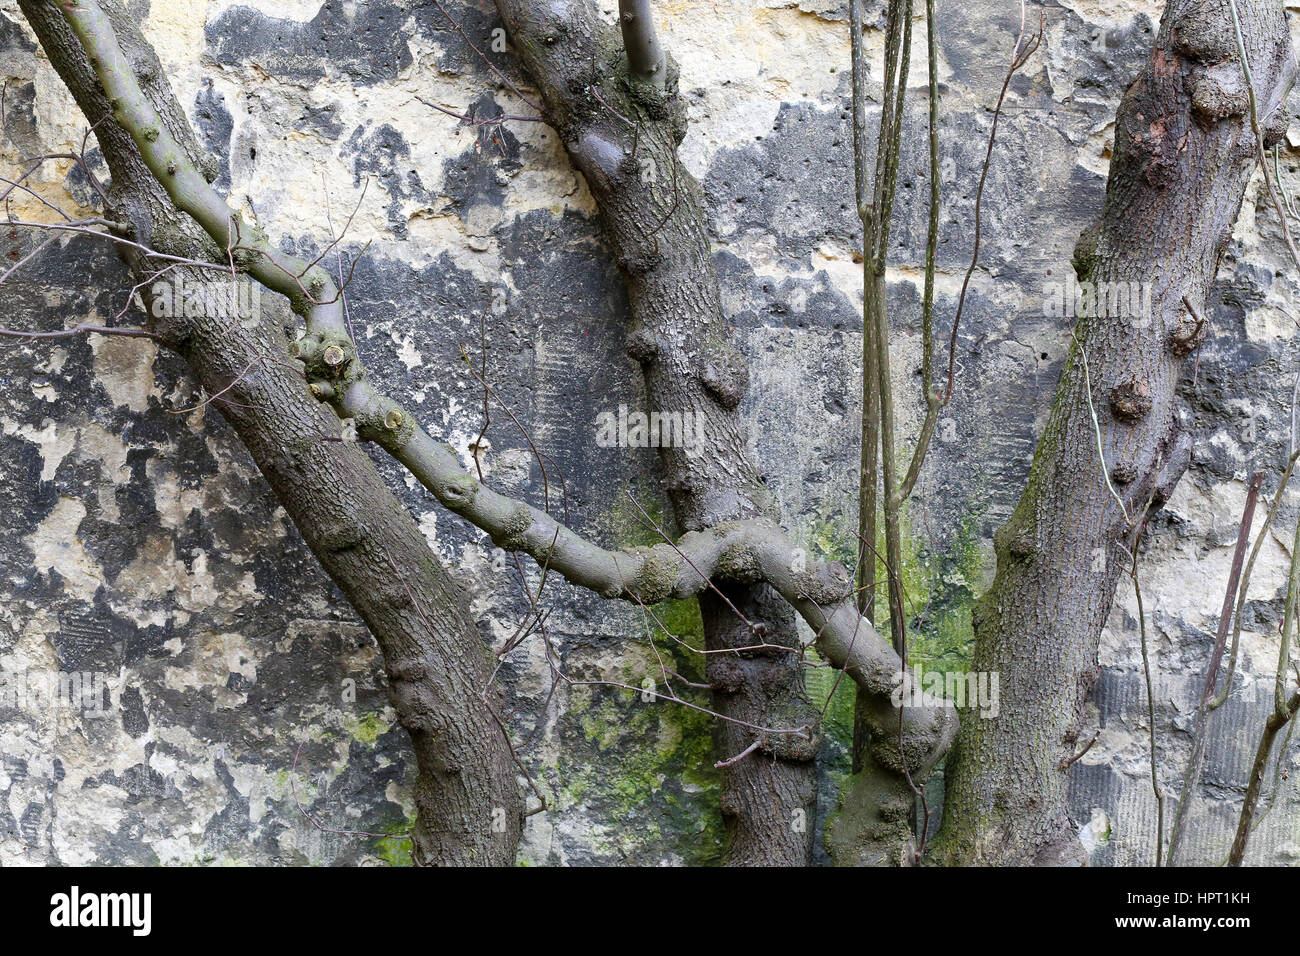 Pruned tree brunches against stone wall in winter background Stock Photo